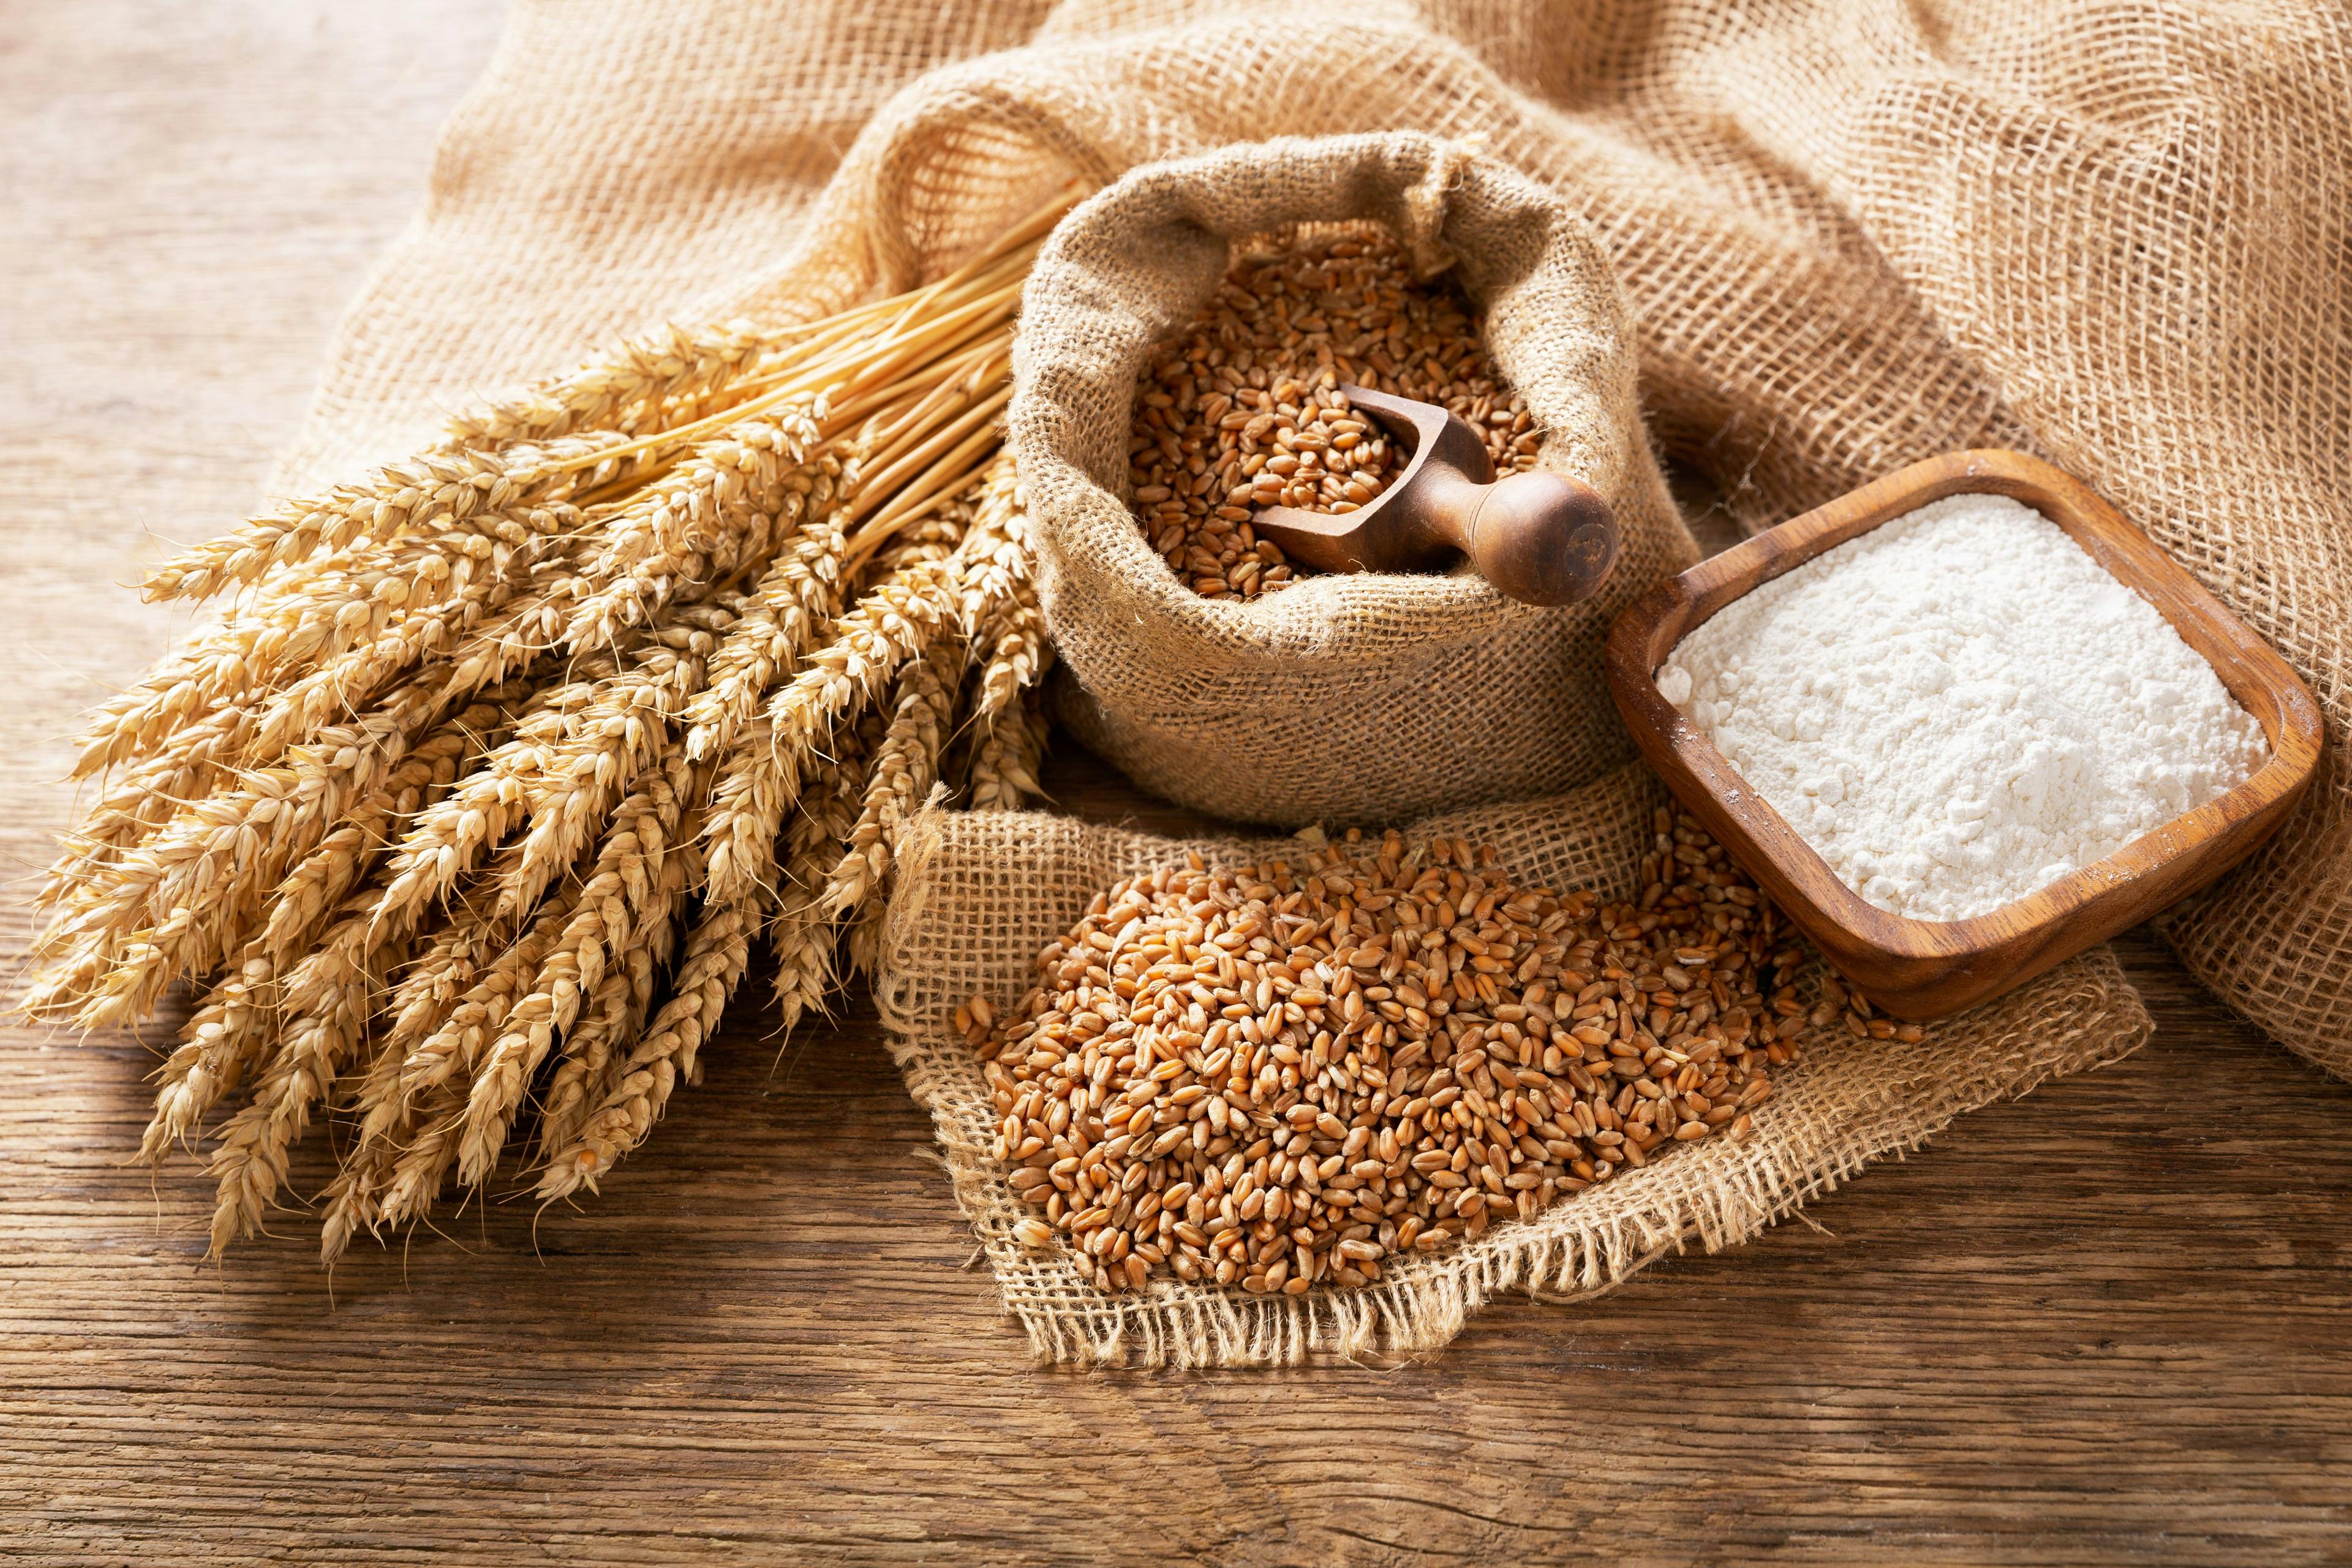 wheat ears, grains and bowl of flour on a wooden table | Image Credit: © Nitr - stock.adobe.com